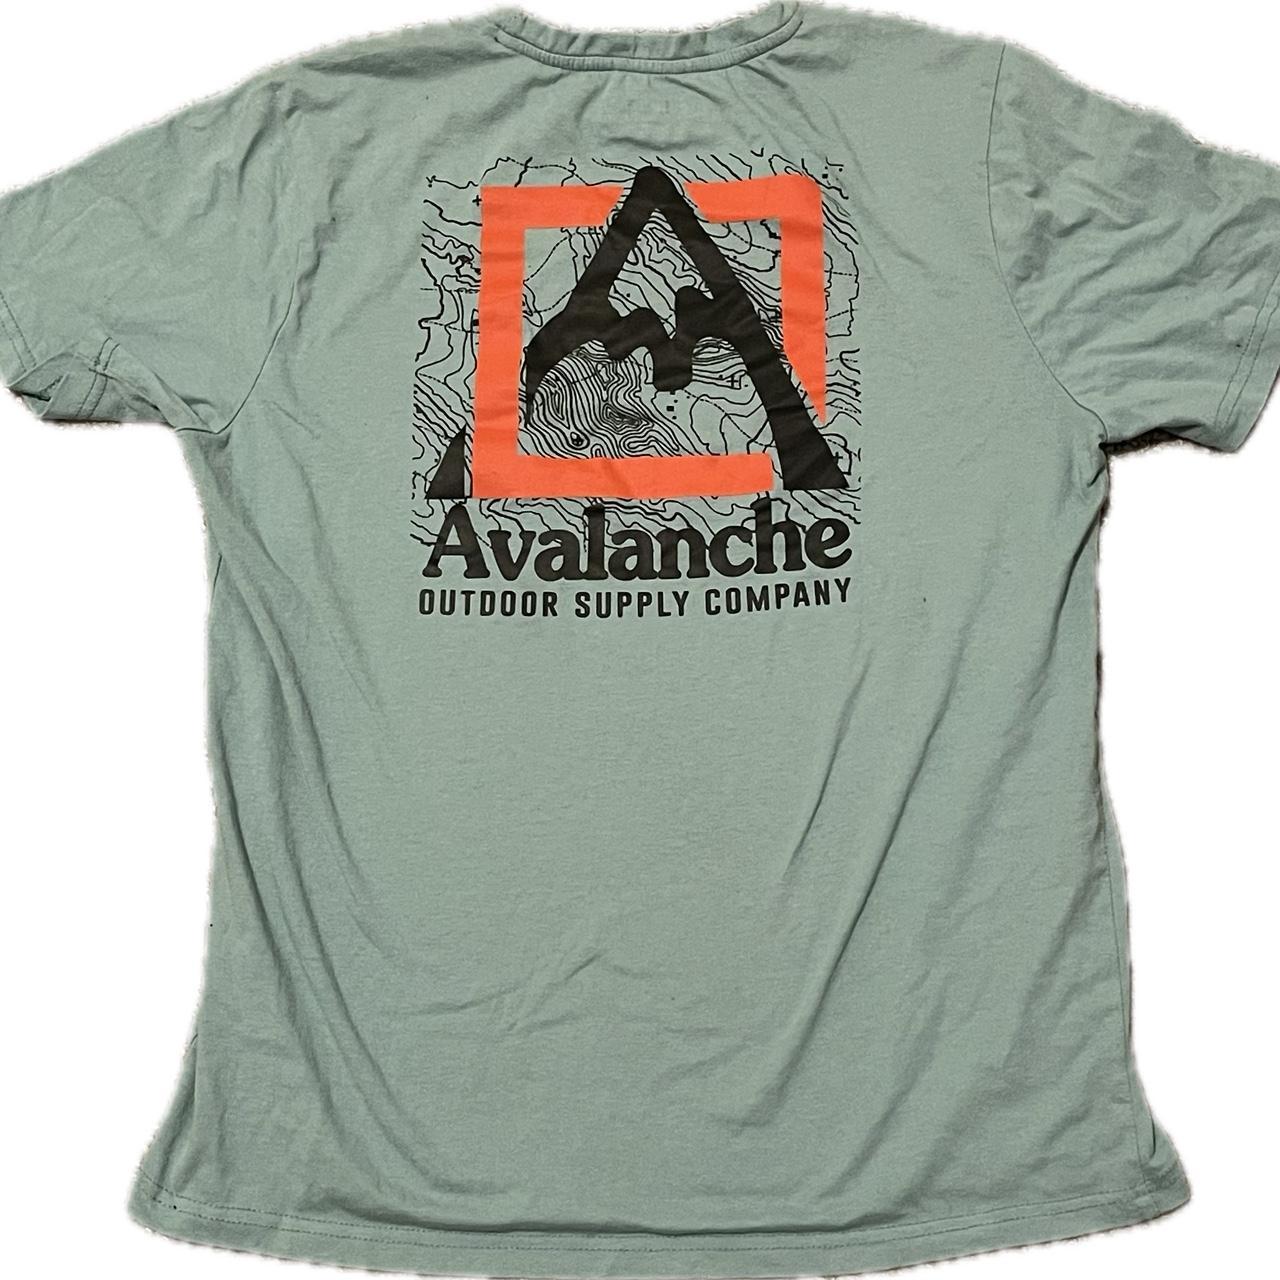 Avalanche Outdoor Supply co , Good shape for the most